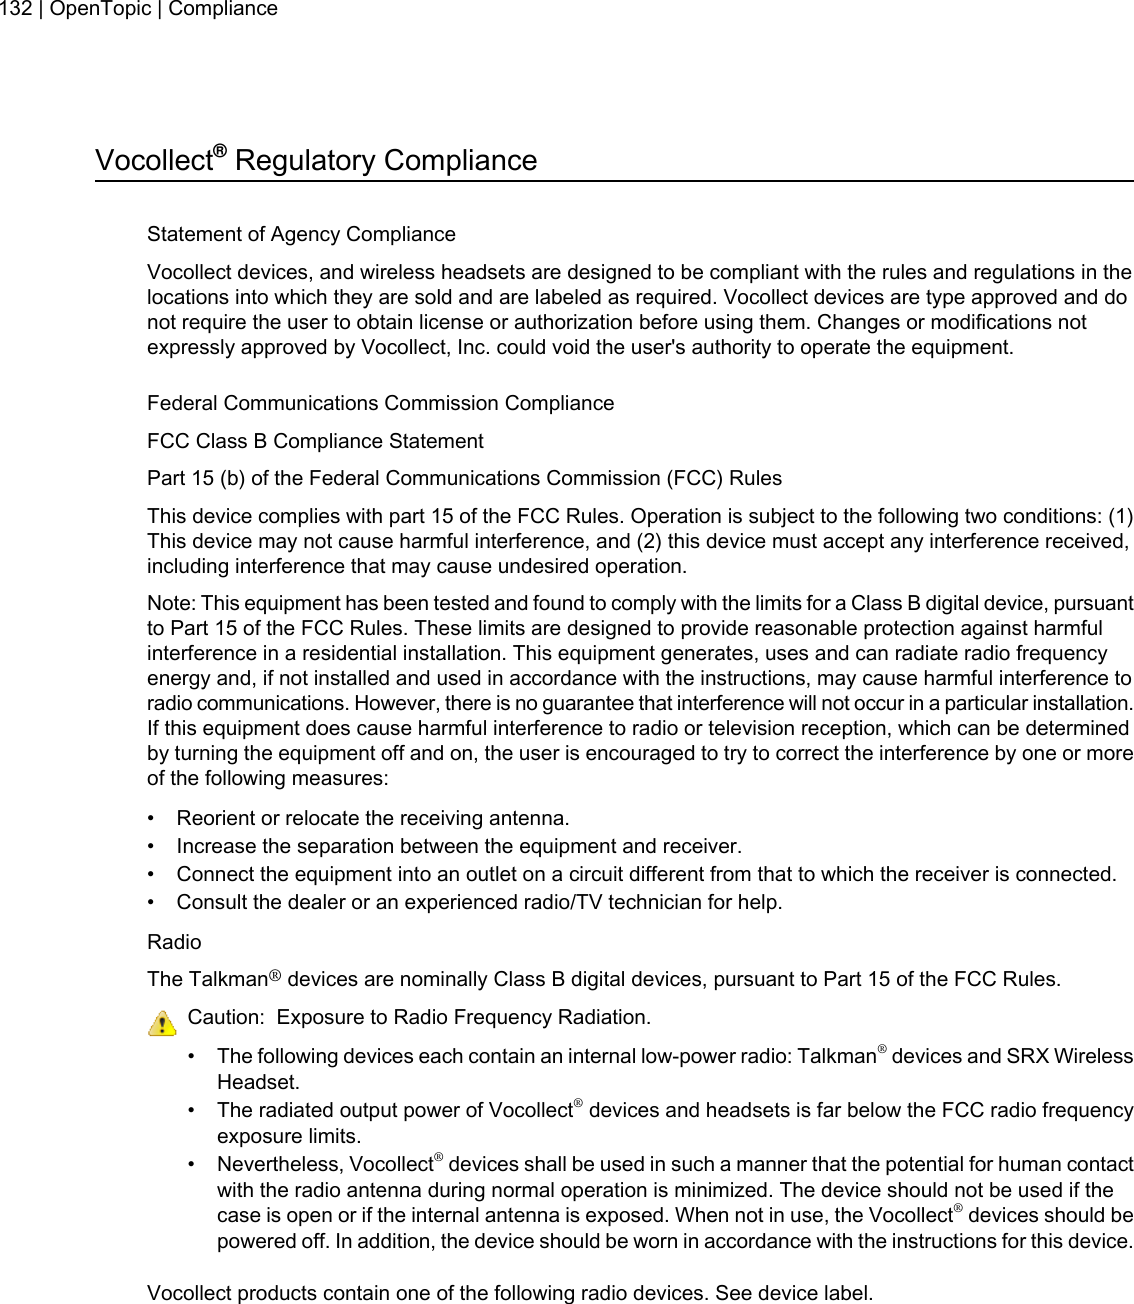 Vocollect®Regulatory ComplianceStatement of Agency ComplianceVocollect devices, and wireless headsets are designed to be compliant with the rules and regulations in thelocations into which they are sold and are labeled as required. Vocollect devices are type approved and donot require the user to obtain license or authorization before using them. Changes or modifications notexpressly approved by Vocollect, Inc. could void the user&apos;s authority to operate the equipment.Federal Communications Commission ComplianceFCC Class B Compliance StatementPart 15 (b) of the Federal Communications Commission (FCC) RulesThis device complies with part 15 of the FCC Rules. Operation is subject to the following two conditions: (1)This device may not cause harmful interference, and (2) this device must accept any interference received,including interference that may cause undesired operation.Note: This equipment has been tested and found to comply with the limits for a Class B digital device, pursuantto Part 15 of the FCC Rules. These limits are designed to provide reasonable protection against harmfulinterference in a residential installation. This equipment generates, uses and can radiate radio frequencyenergy and, if not installed and used in accordance with the instructions, may cause harmful interference toradio communications. However, there is no guarantee that interference will not occur in a particular installation.If this equipment does cause harmful interference to radio or television reception, which can be determinedby turning the equipment off and on, the user is encouraged to try to correct the interference by one or moreof the following measures:• Reorient or relocate the receiving antenna.• Increase the separation between the equipment and receiver.• Connect the equipment into an outlet on a circuit different from that to which the receiver is connected.• Consult the dealer or an experienced radio/TV technician for help.RadioThe Talkman®devices are nominally Class B digital devices, pursuant to Part 15 of the FCC Rules.Caution: Exposure to Radio Frequency Radiation.• The following devices each contain an internal low-power radio: Talkman®devices and SRX WirelessHeadset.• The radiated output power of Vocollect®devices and headsets is far below the FCC radio frequencyexposure limits.• Nevertheless, Vocollect®devices shall be used in such a manner that the potential for human contactwith the radio antenna during normal operation is minimized. The device should not be used if thecase is open or if the internal antenna is exposed. When not in use, the Vocollect®devices should bepowered off. In addition, the device should be worn in accordance with the instructions for this device.Vocollect products contain one of the following radio devices. See device label.132 | OpenTopic | Compliance